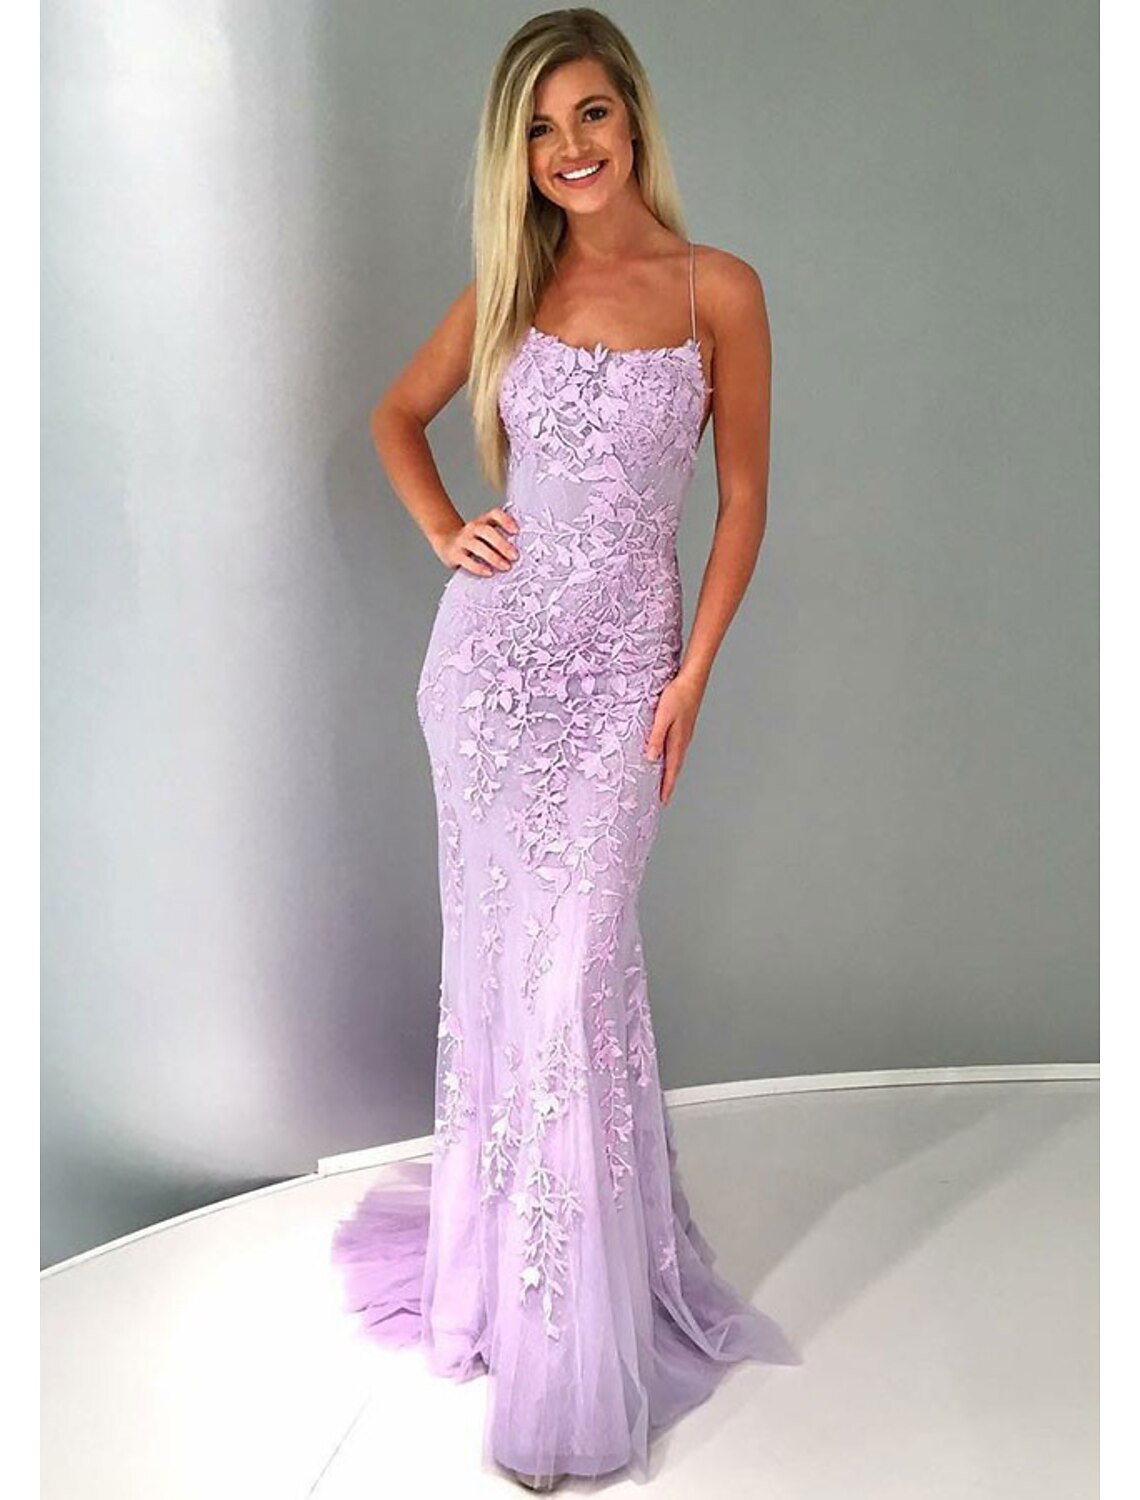 Mermaid / Trumpet Prom Dresses Sexy Dress Formal Court Train Sleeveless Strapless Lace Backless with Appliques